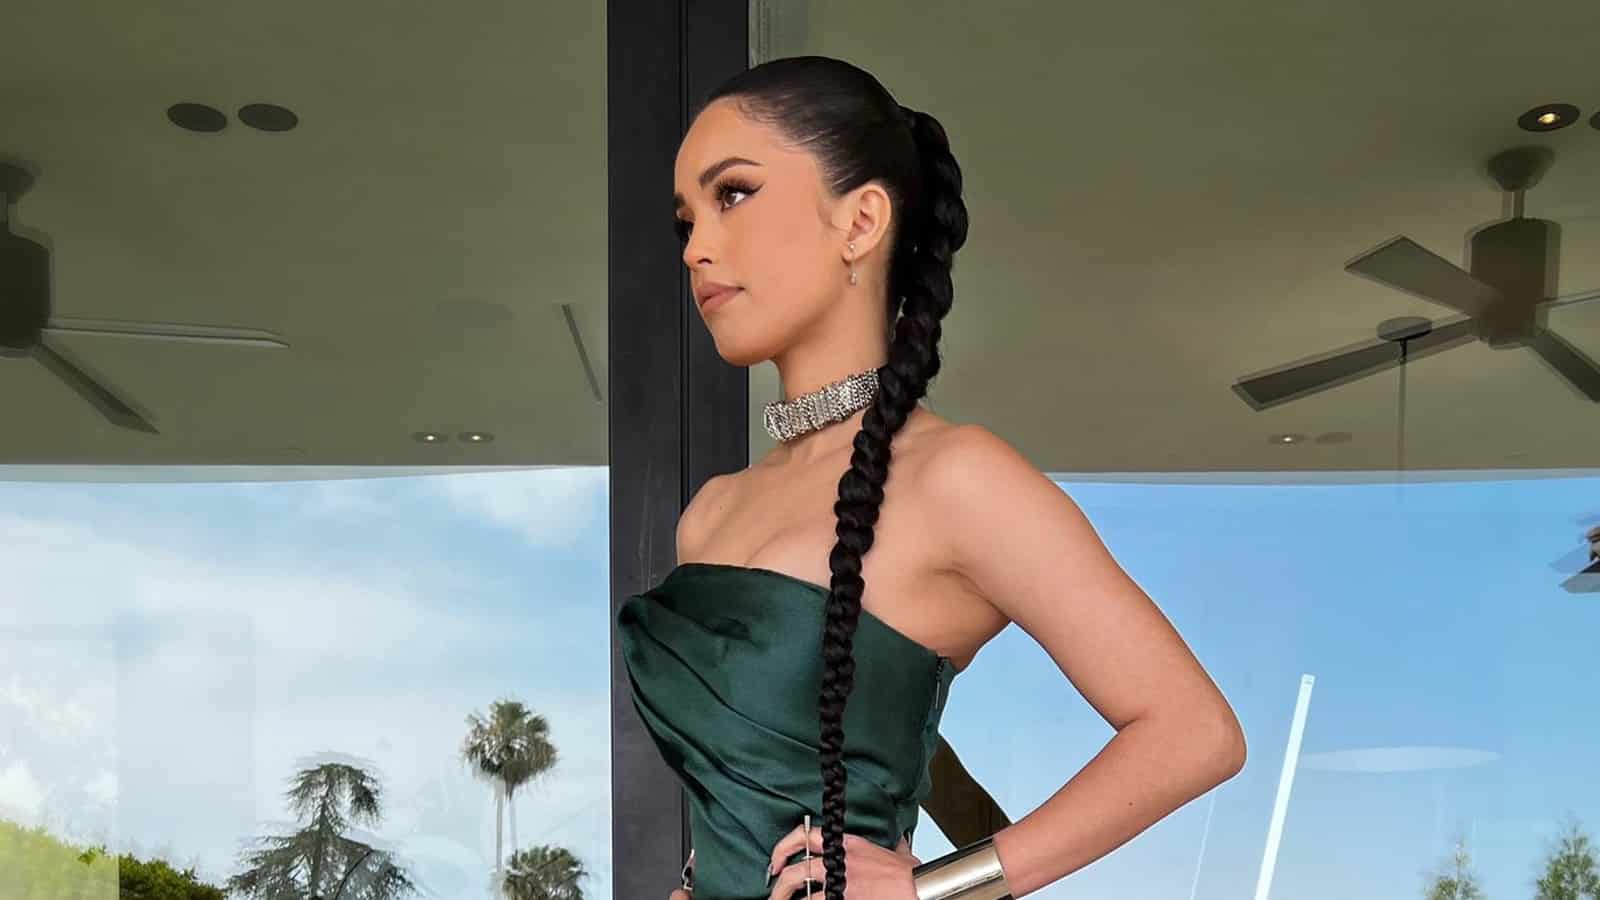 Valkyrae in long dress ready to attend gala